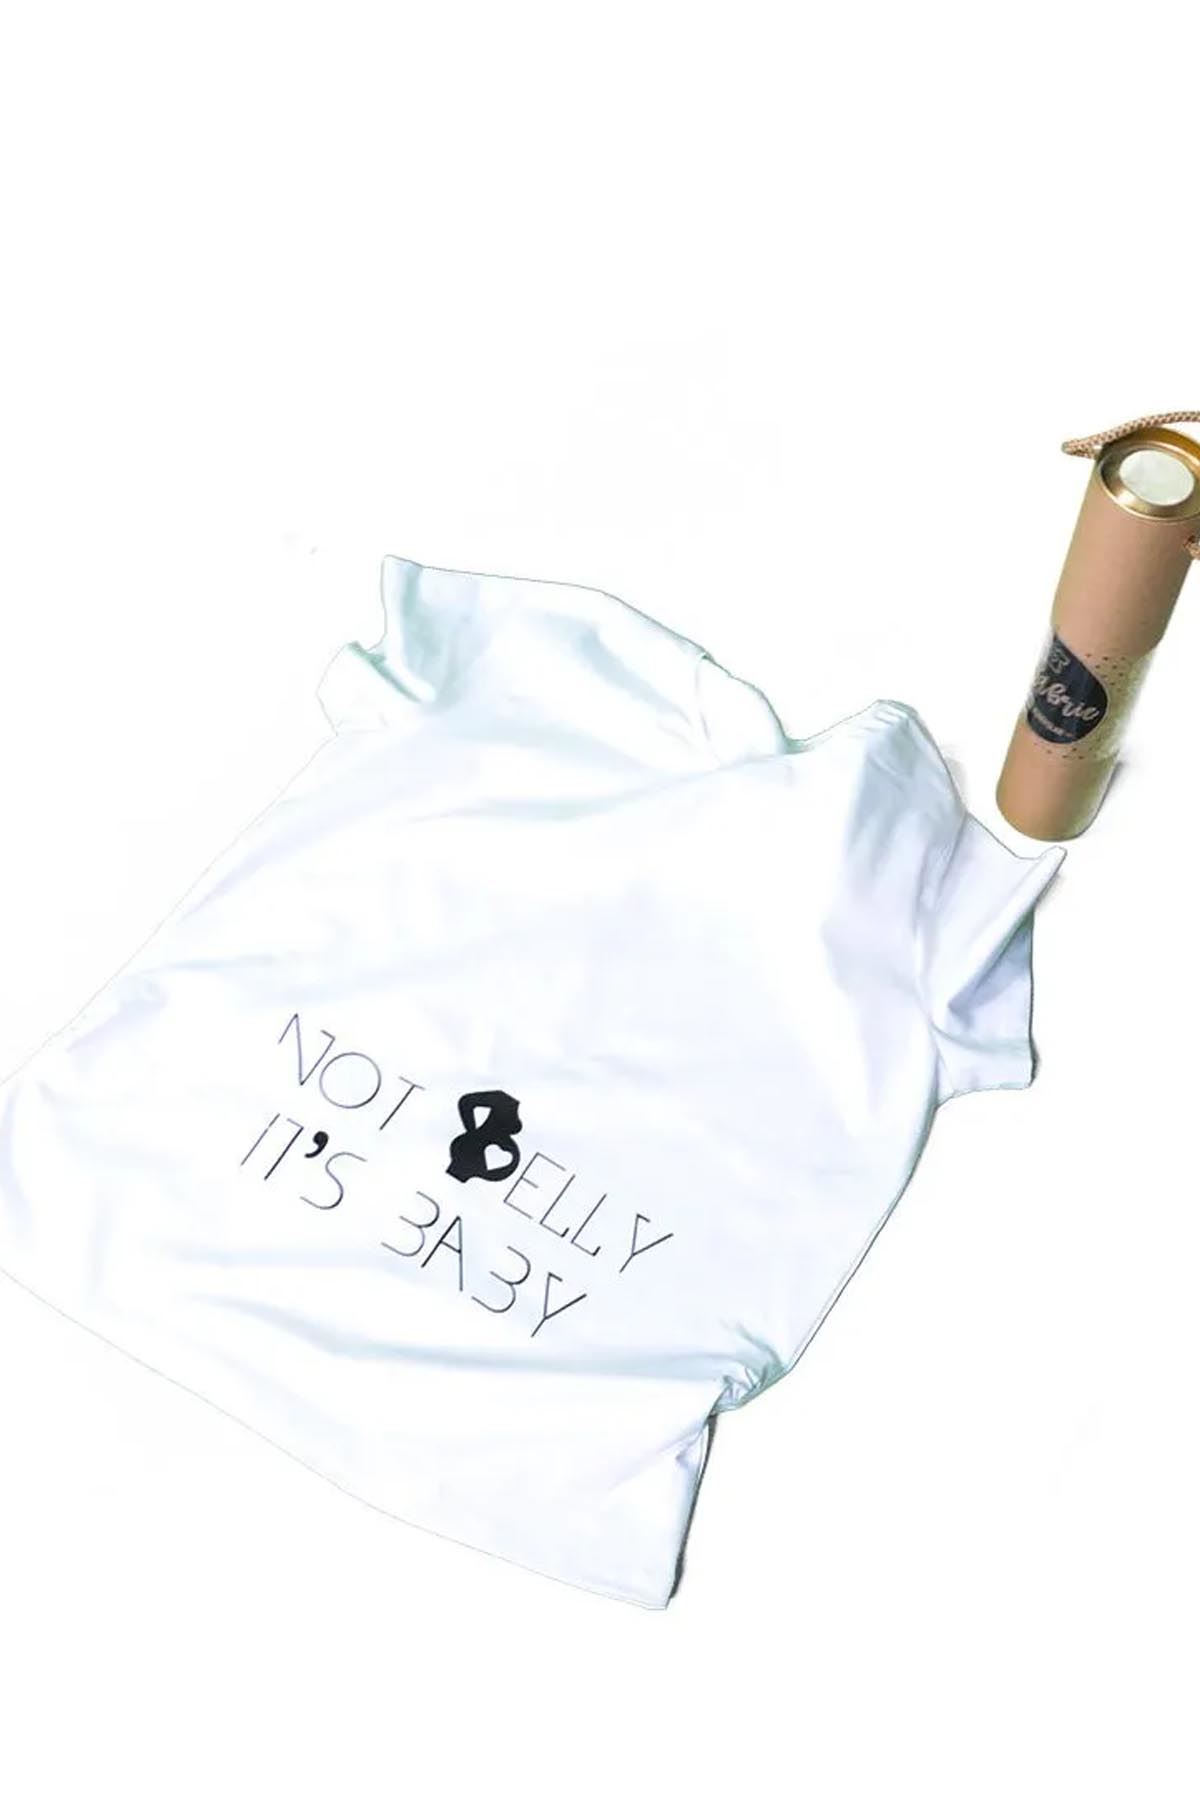 Not Belly it’s baby Hamile T-shirt Beyaz